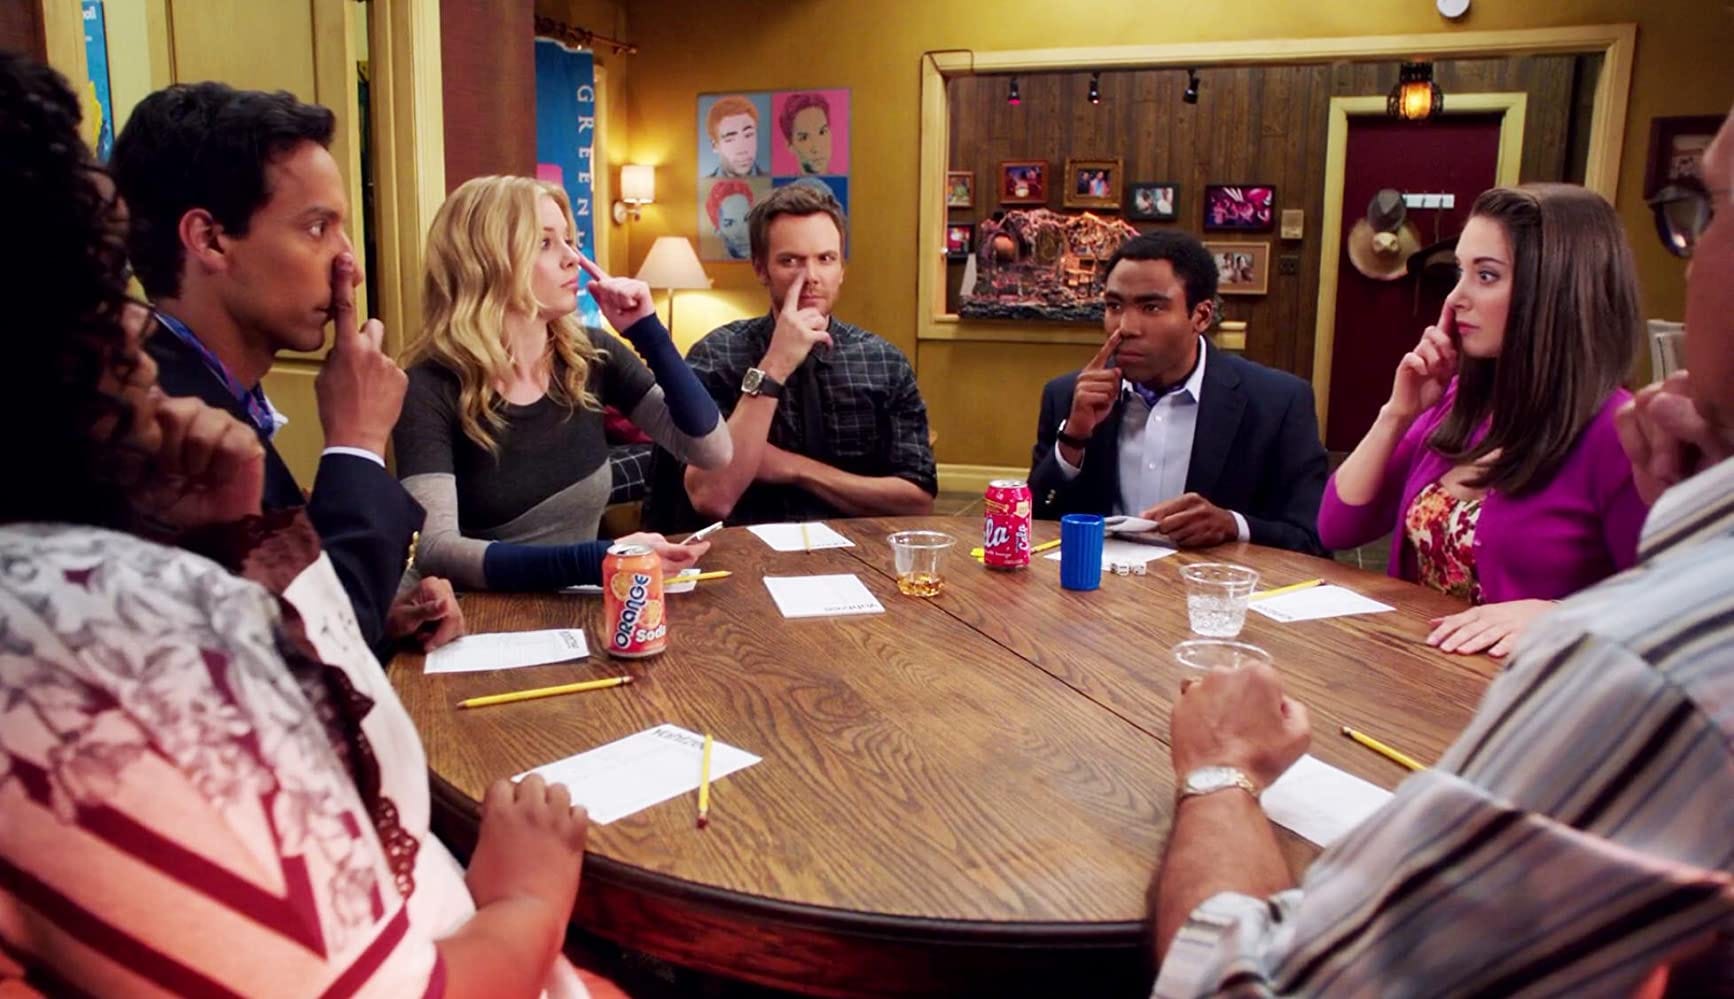 Community. 2009-2015. NBC. The study group sitting around a table playing nose goes. 